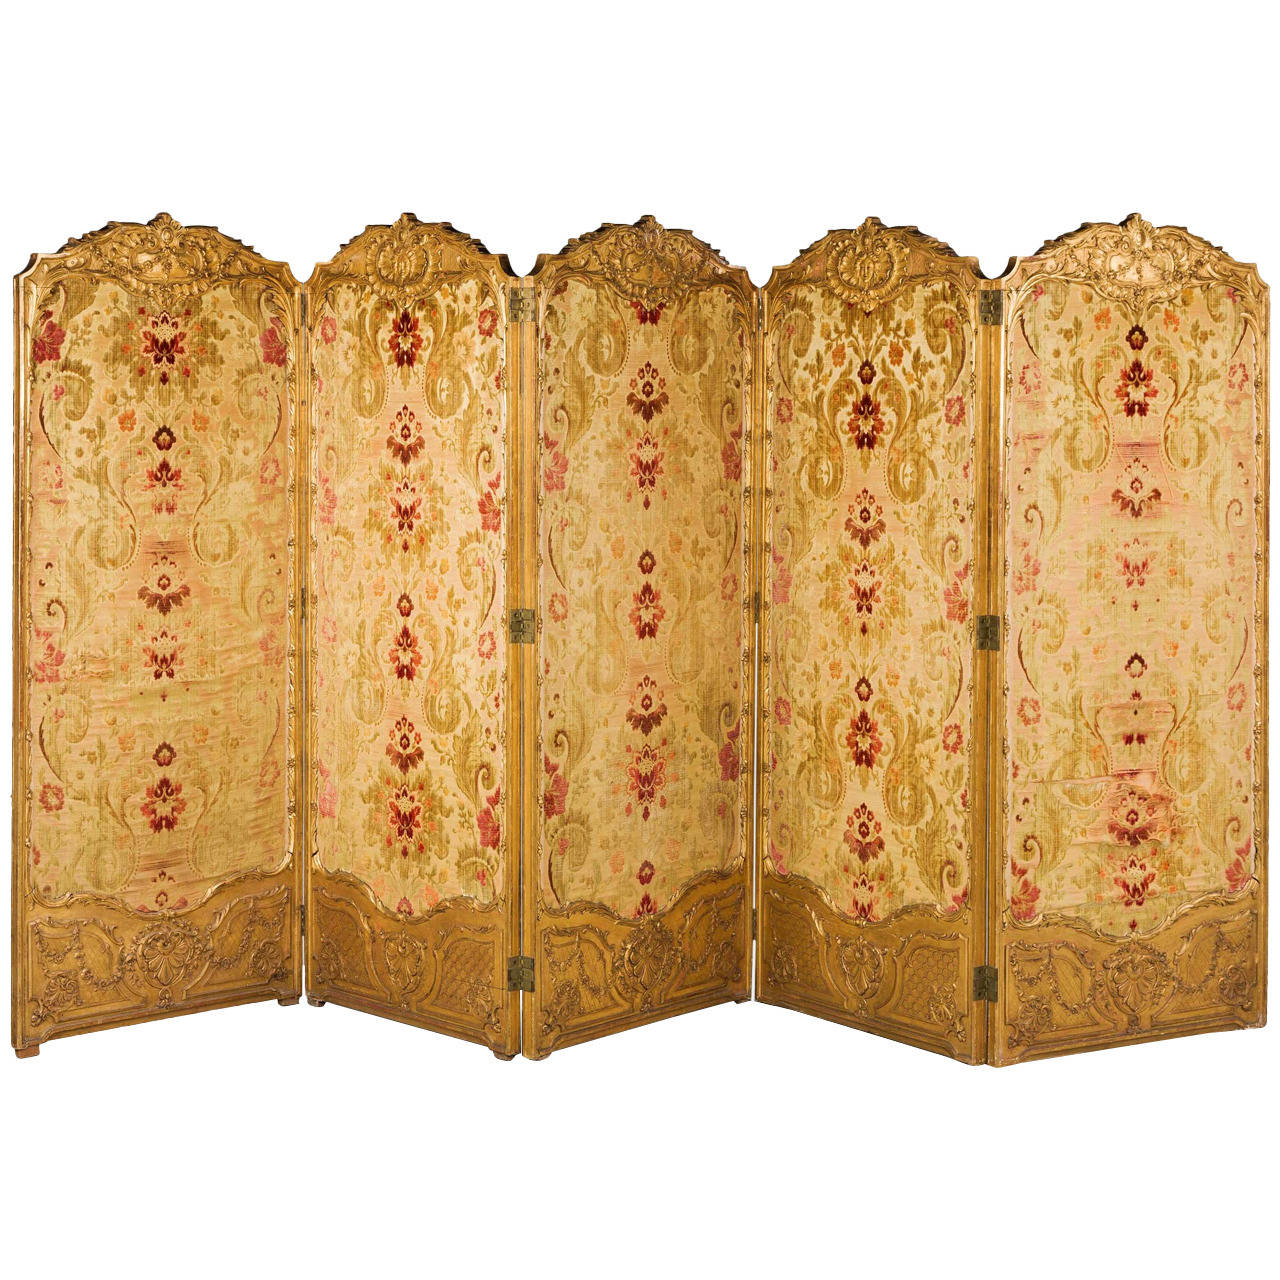 19th Century French Giltwood Four-Fold Screen